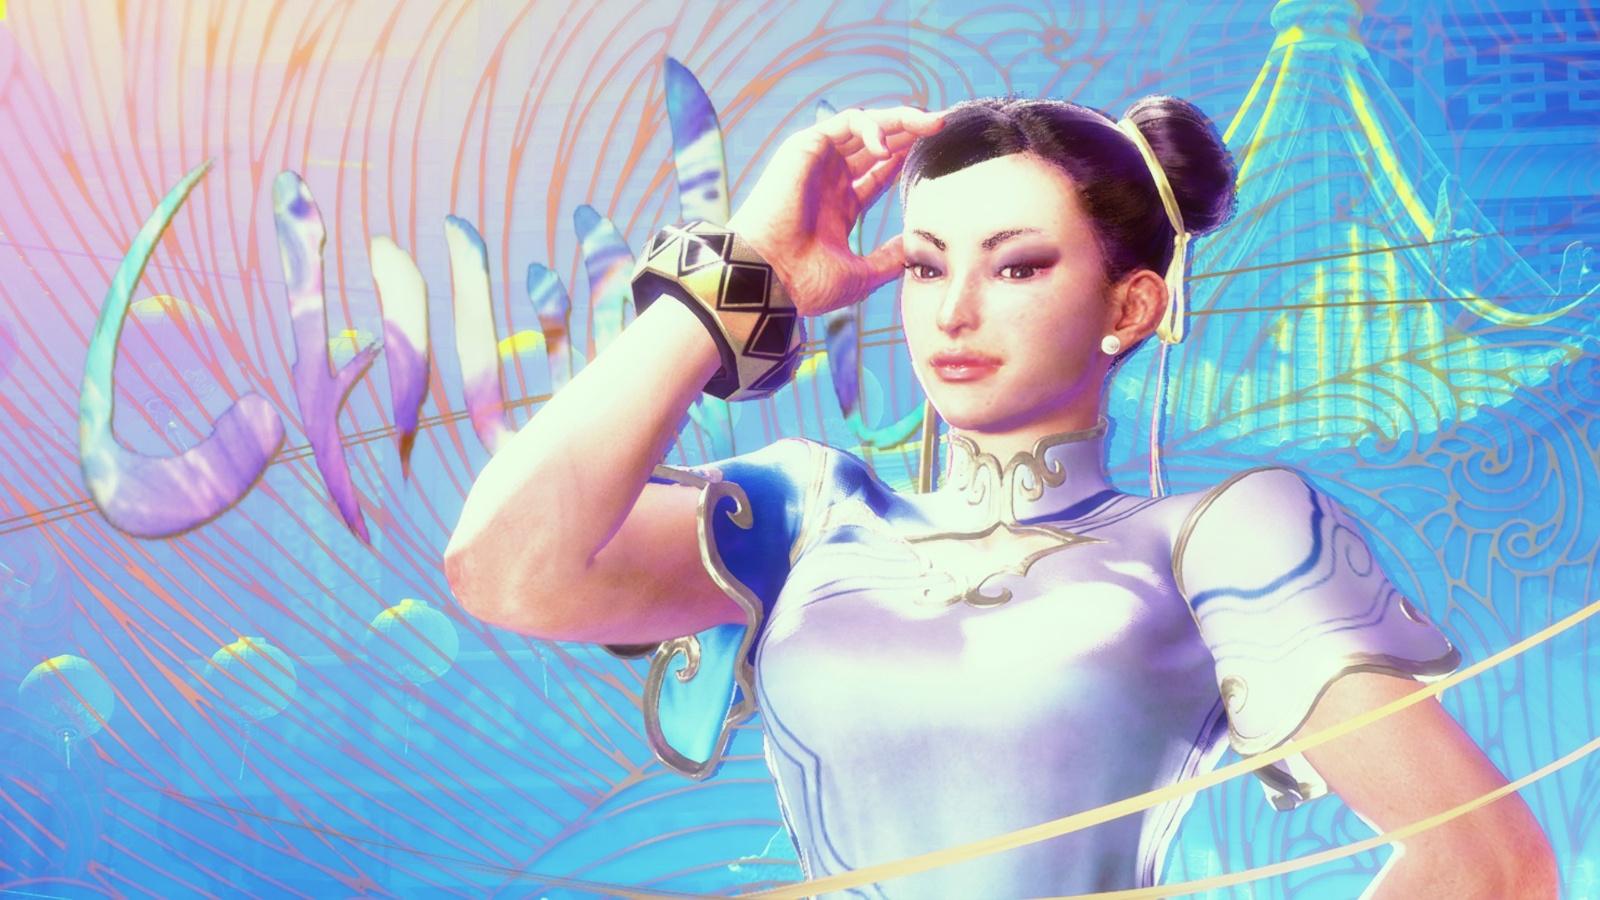 These major changes in Street Fighter 6 will have a huge impact